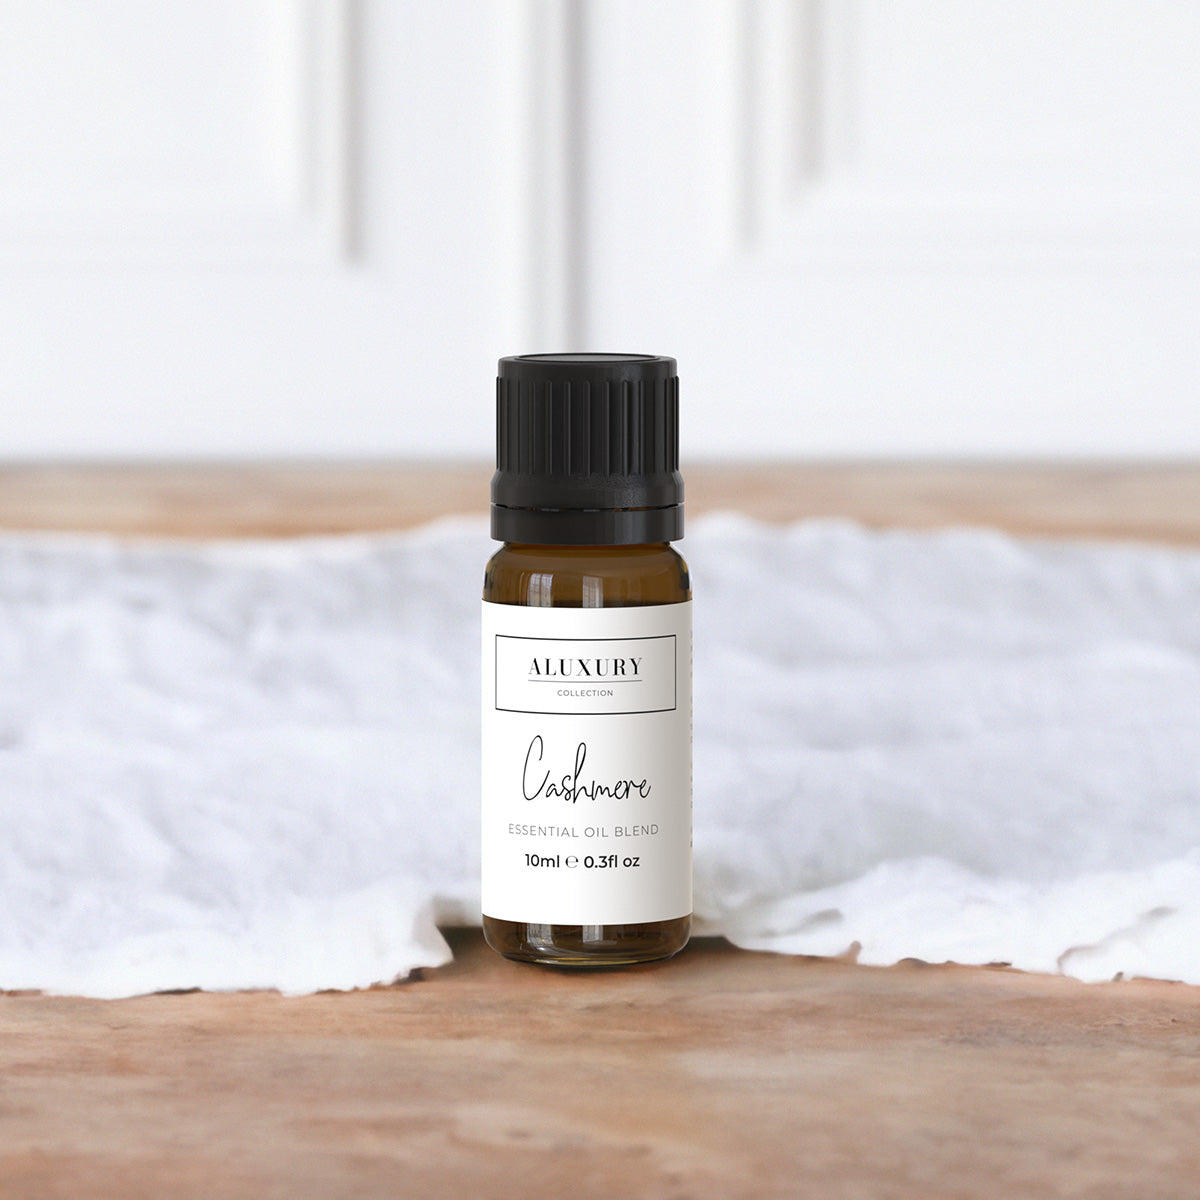 Cashmere - 10ml Essential Oil Blend by Aluxury